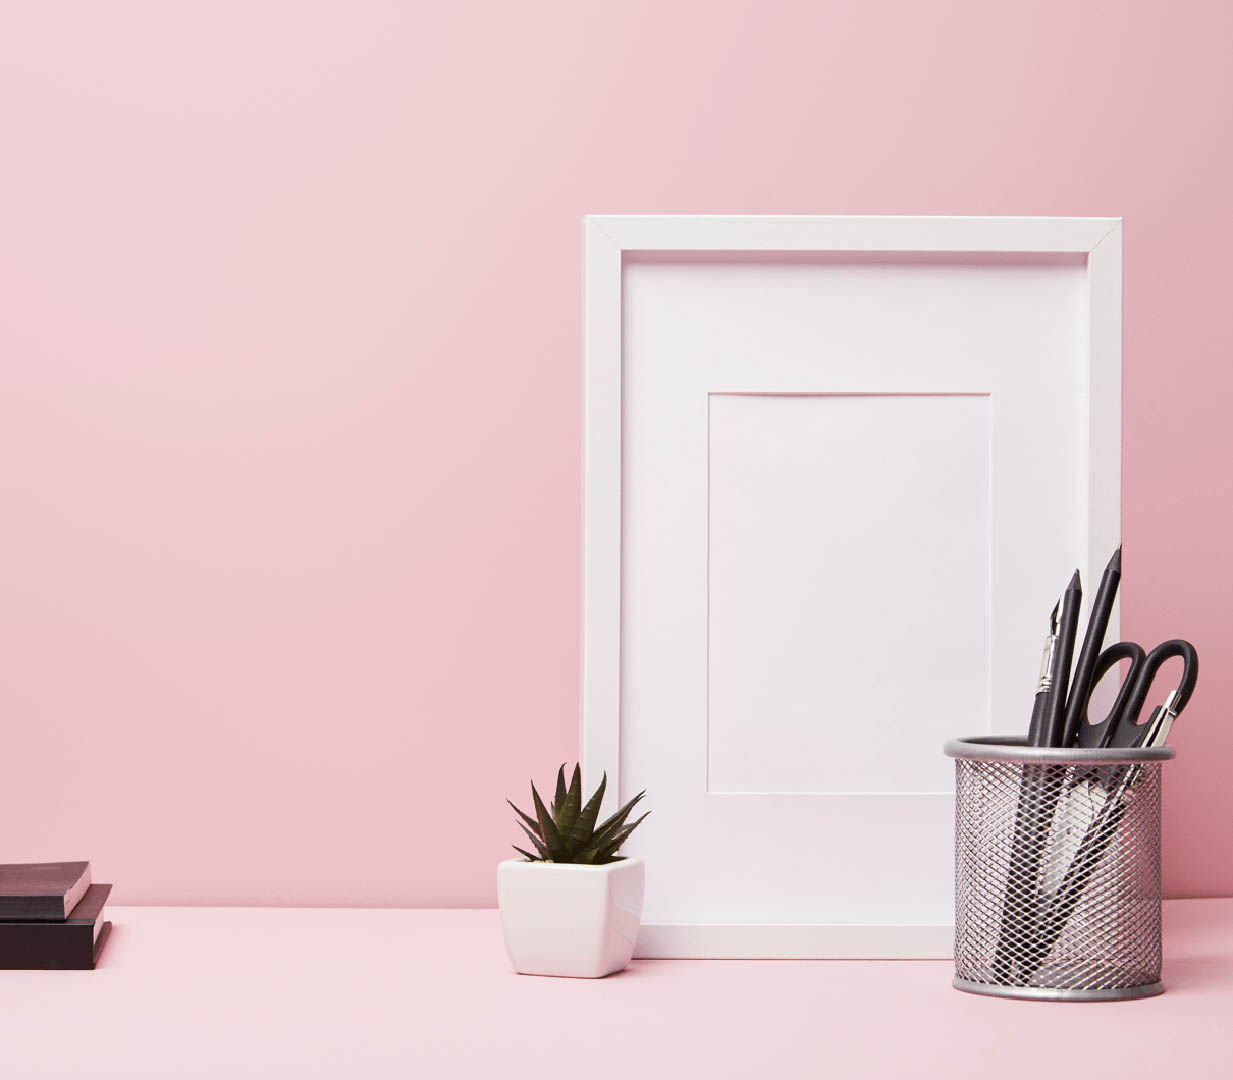 Broadview’s Top Colour Trends for Your Home Pink Image